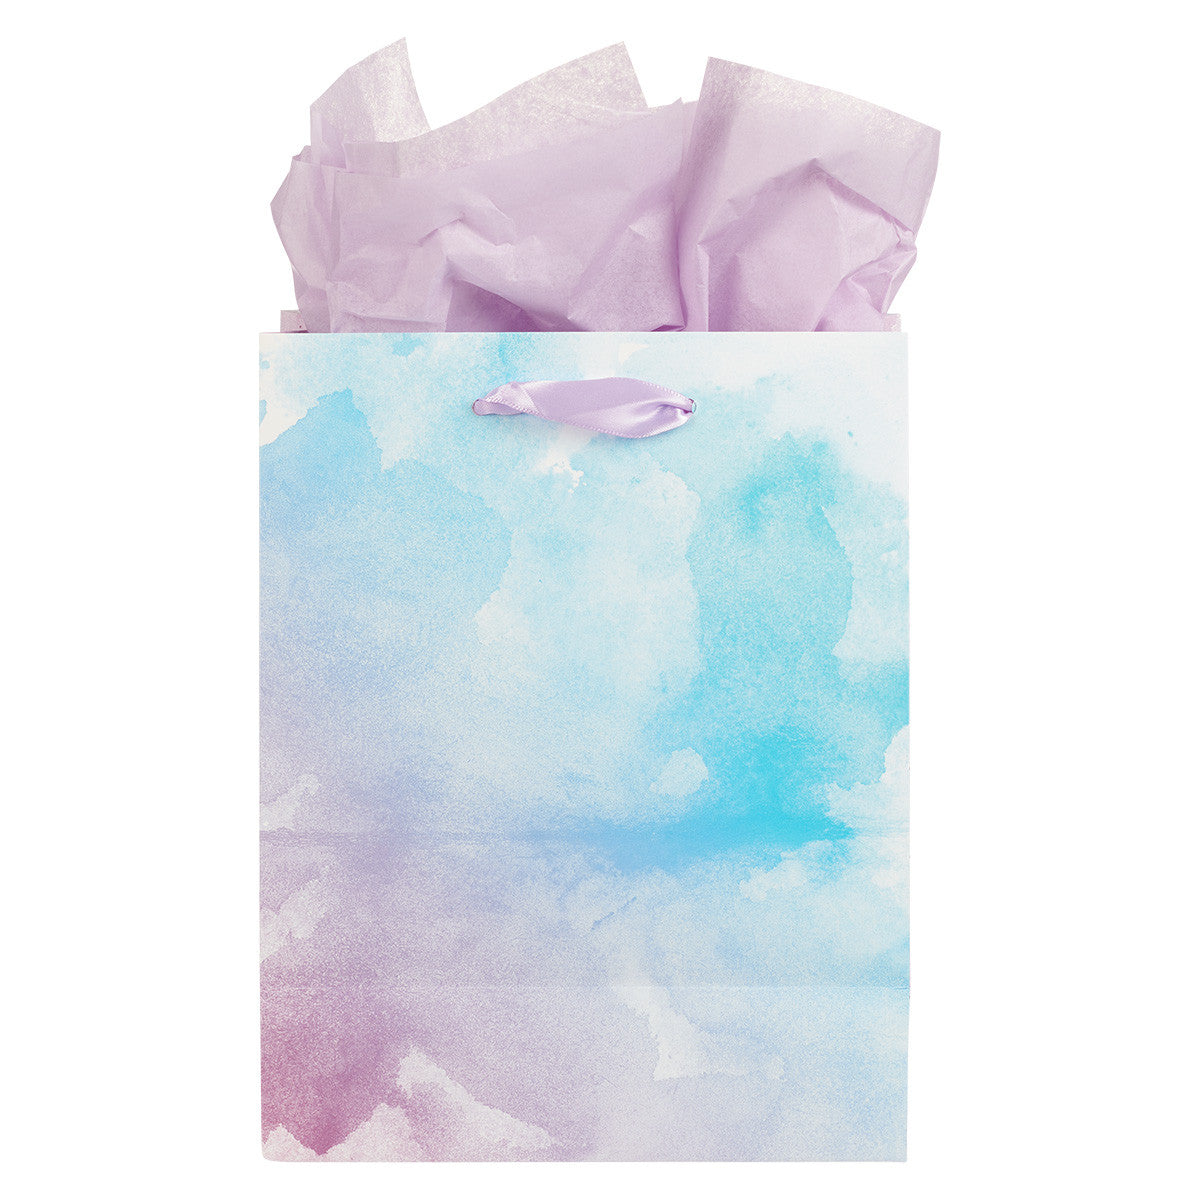 Be Still & Know Lilac and Blue Watercolour Medium Gift Bag - Psalm 46:10 - The Christian Gift Company